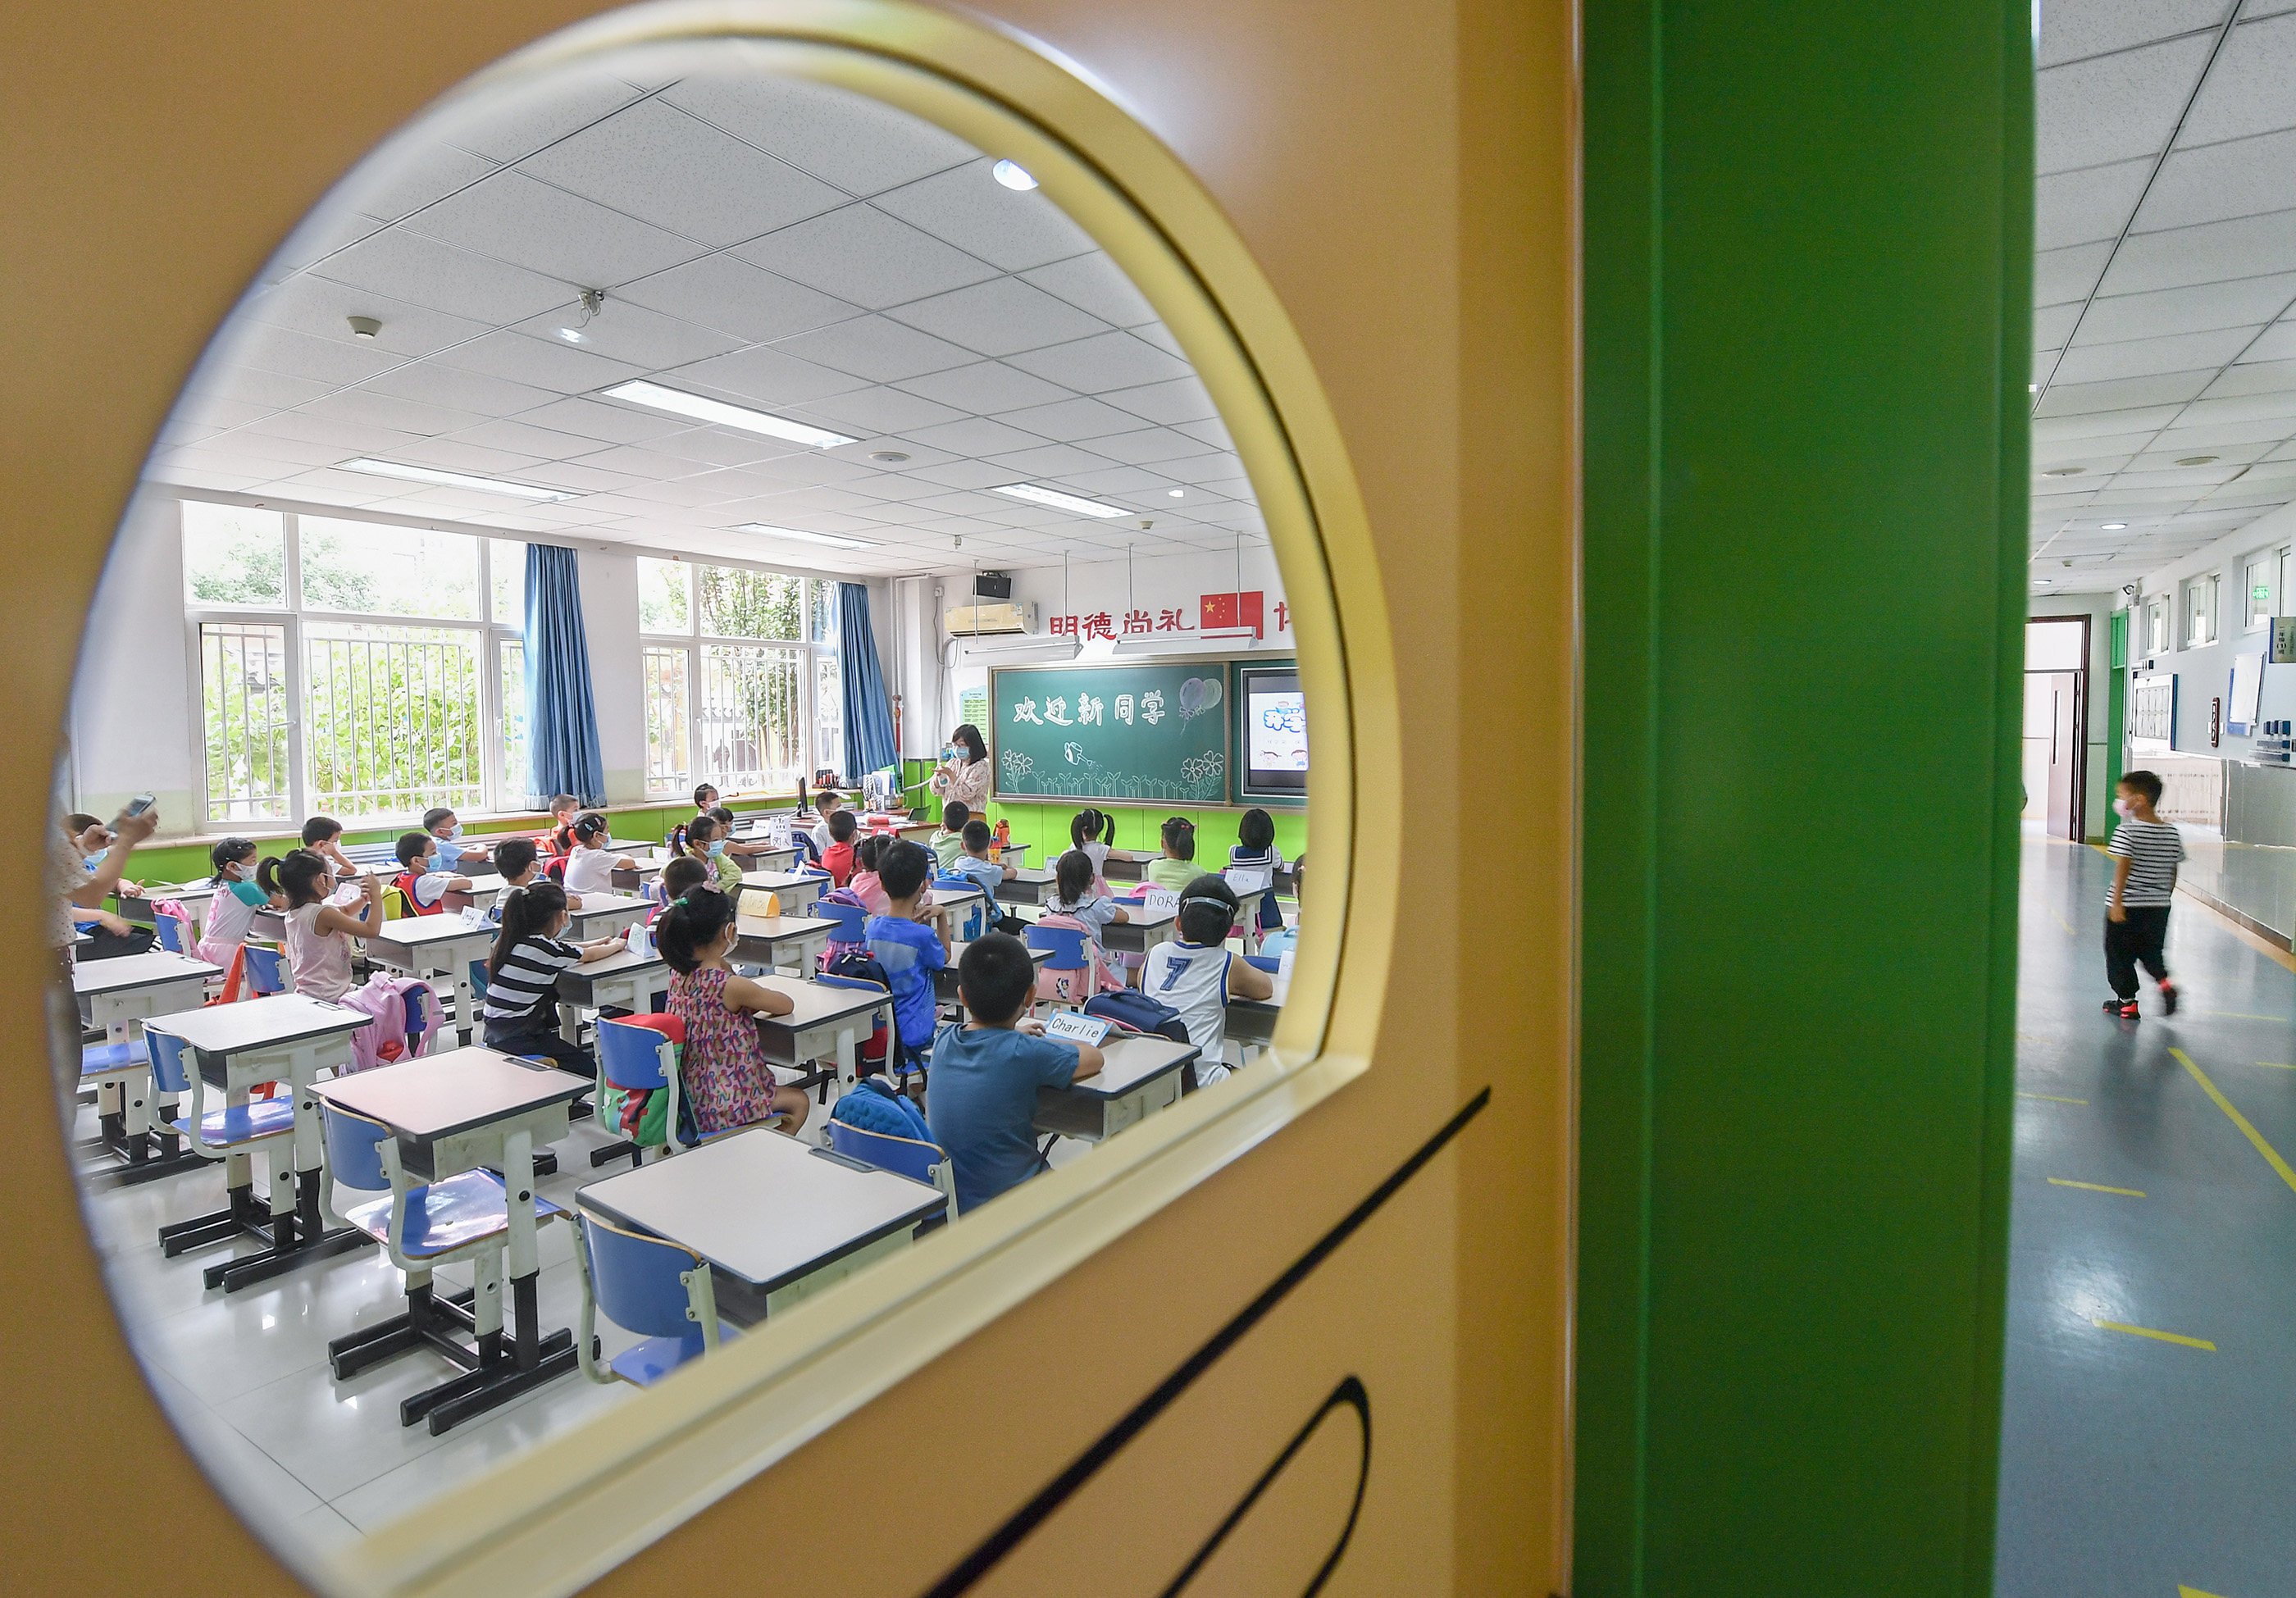 International schools in China have faced increased oversight in recent years. Photo: Xinhua